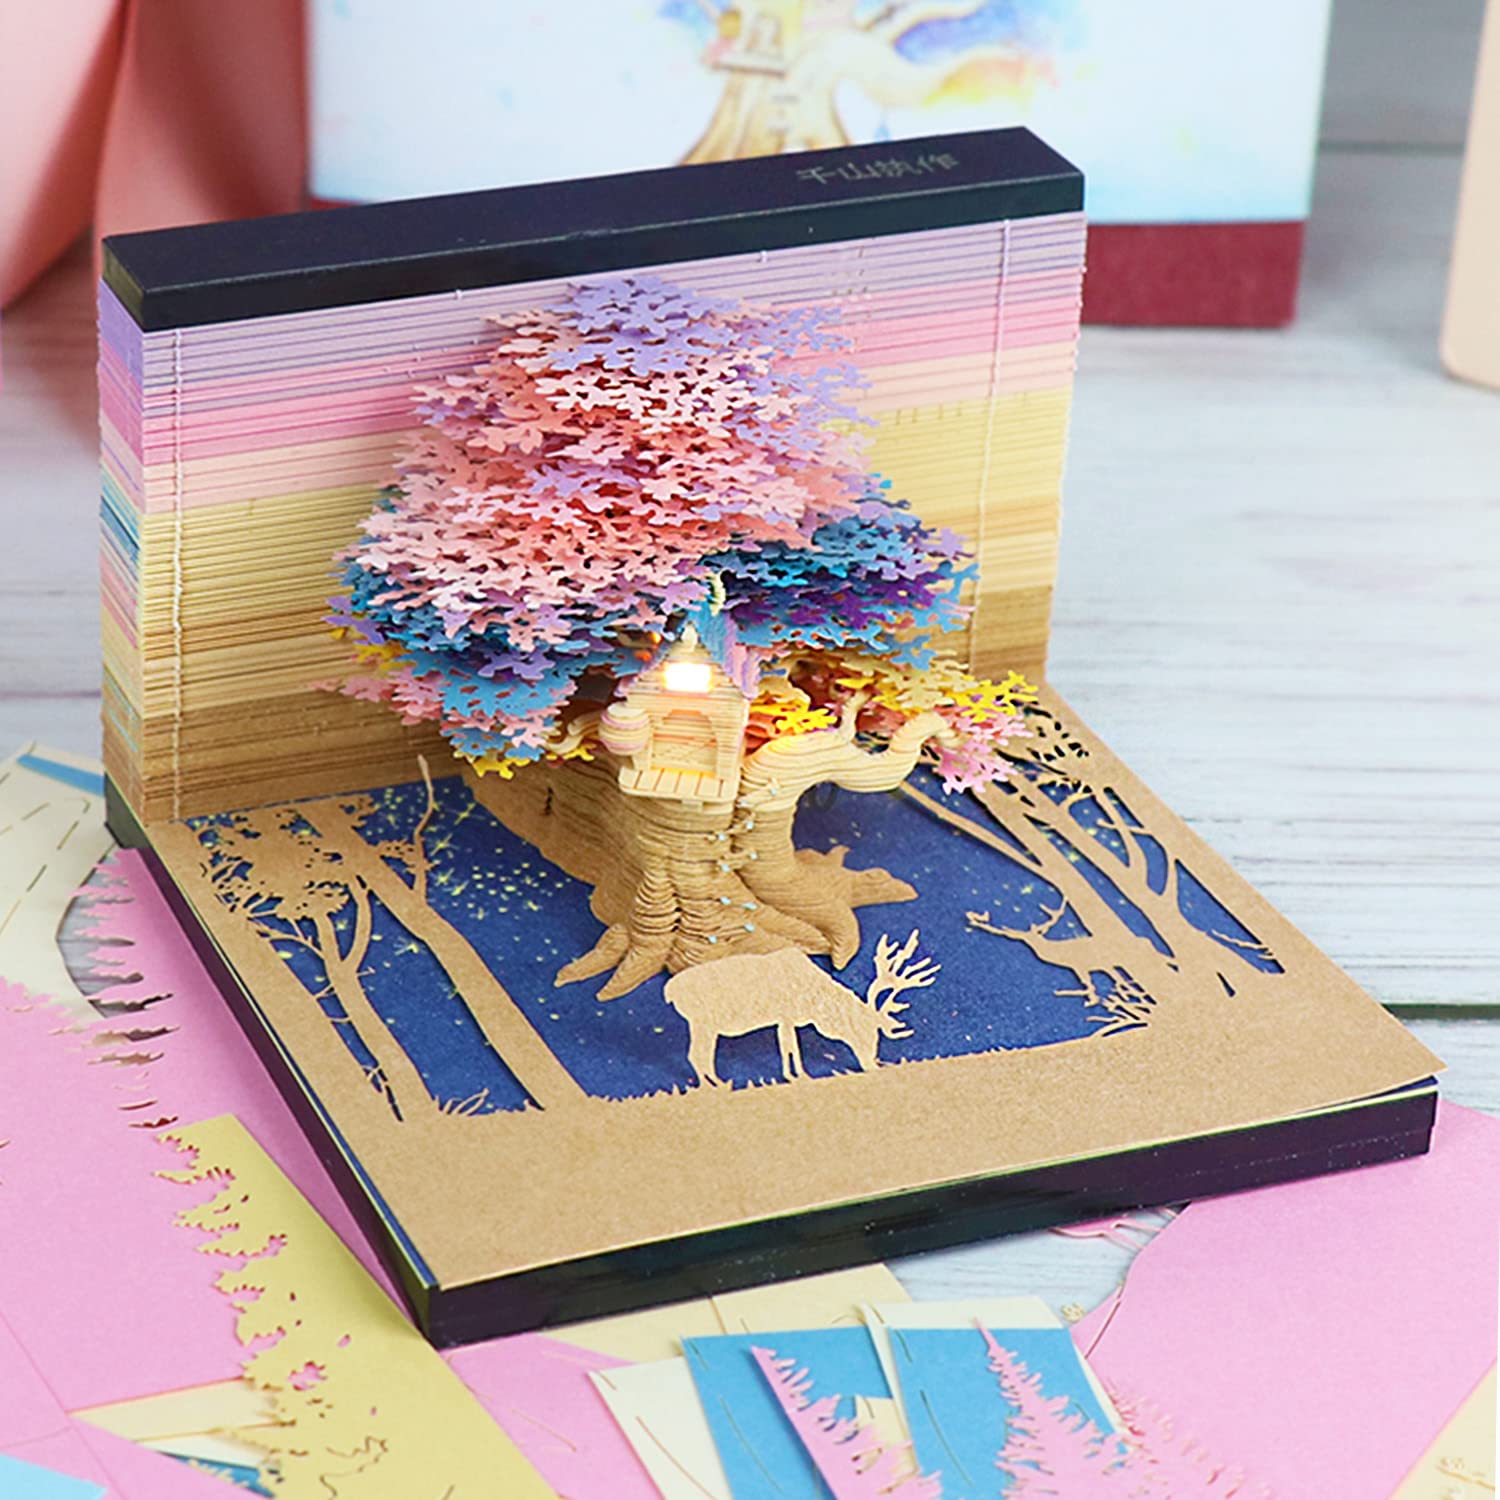 Cherry Blossom Fantasy - 3D Memo Pad with Led Light（Multicolored）-BOOK NOOK WORLD